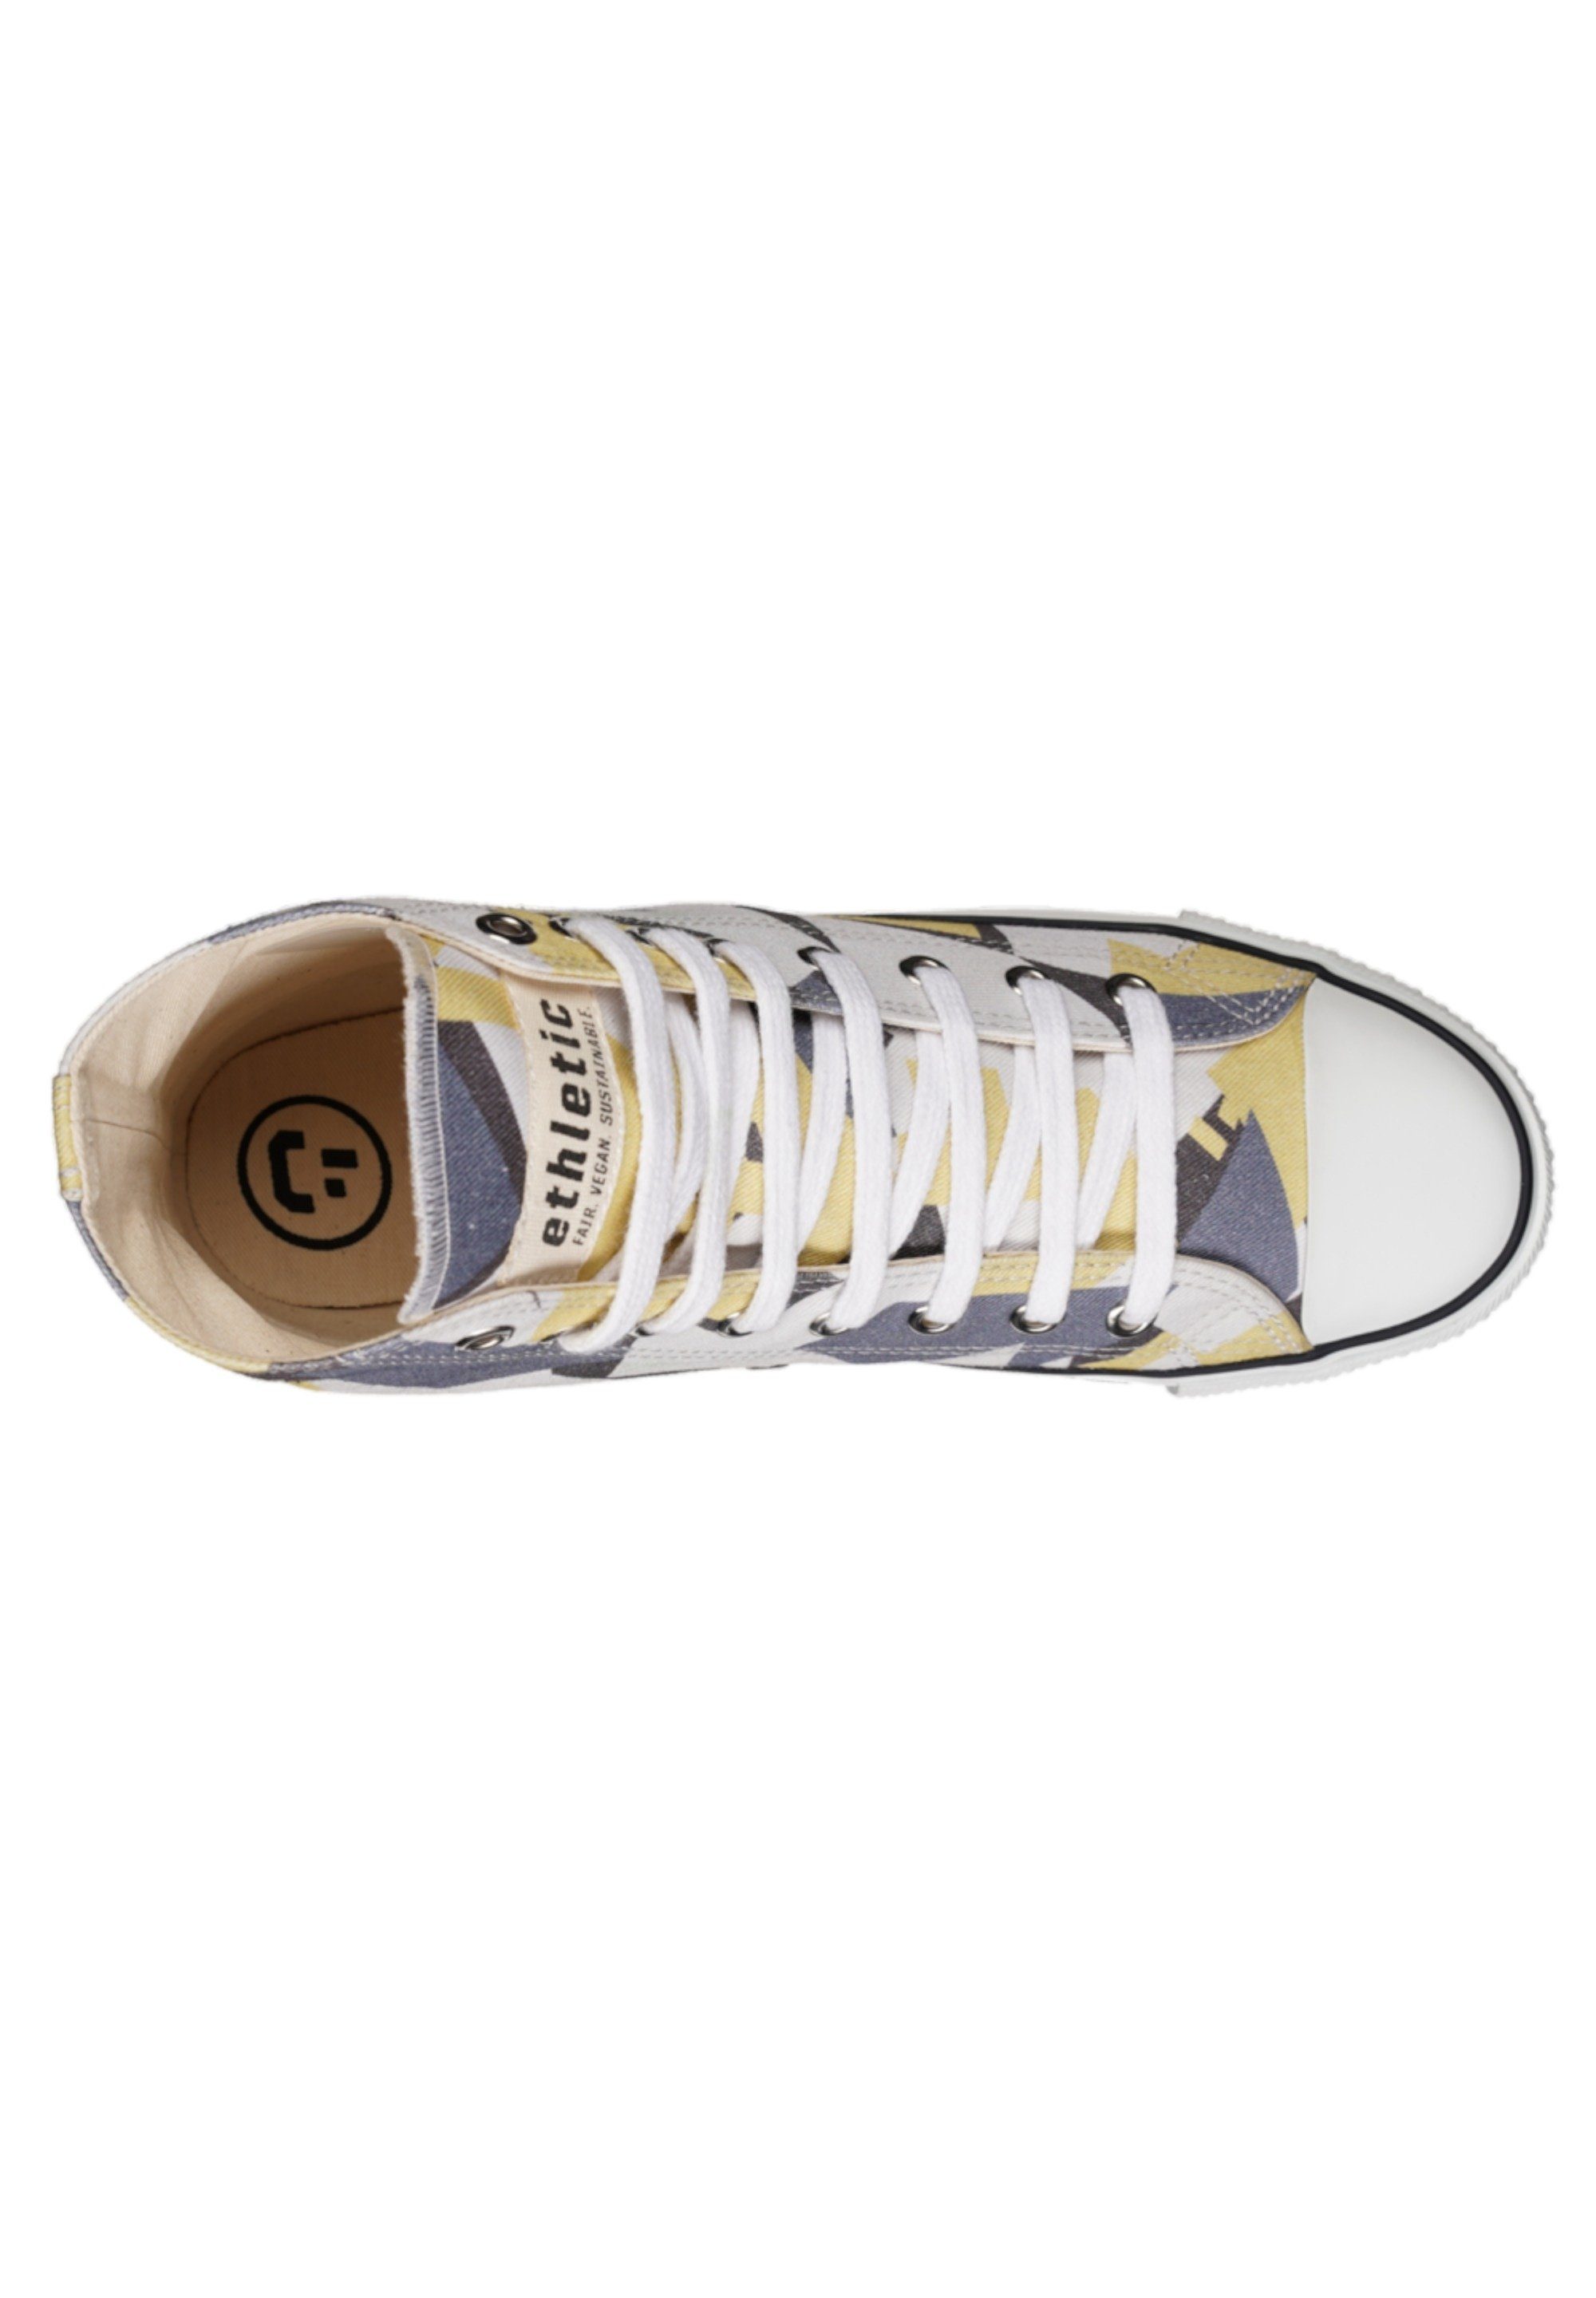 Cut - Sneaker Camou Yellow Produkt White Hi Fairtrade Just Cap ETHLETIC White